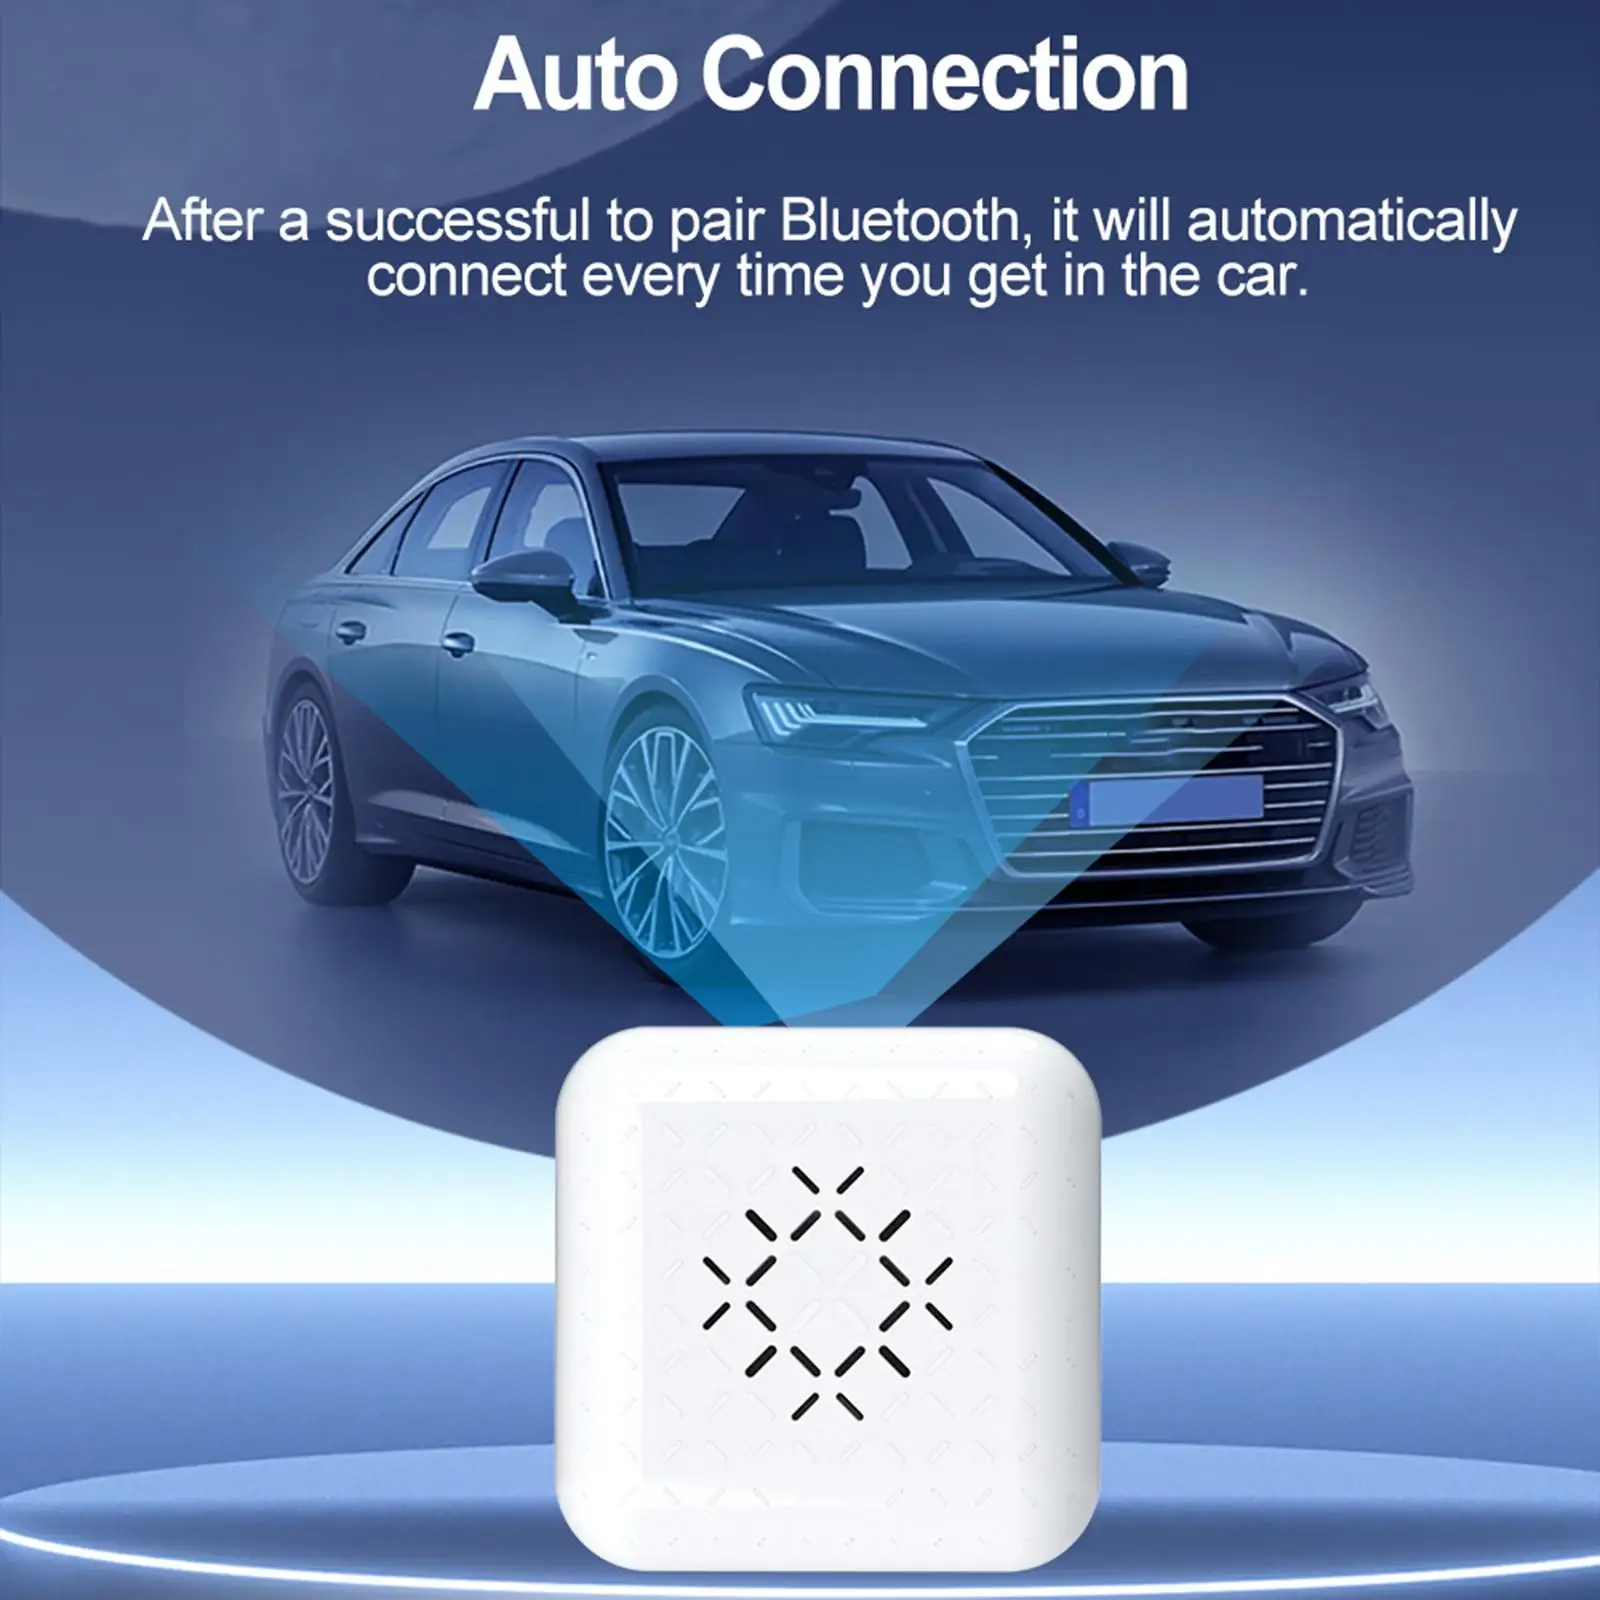 Wireless Car Play Adapter, Converts Wired Car Play Connection to Wireless Connection Dongle for Wired Car Play Cars